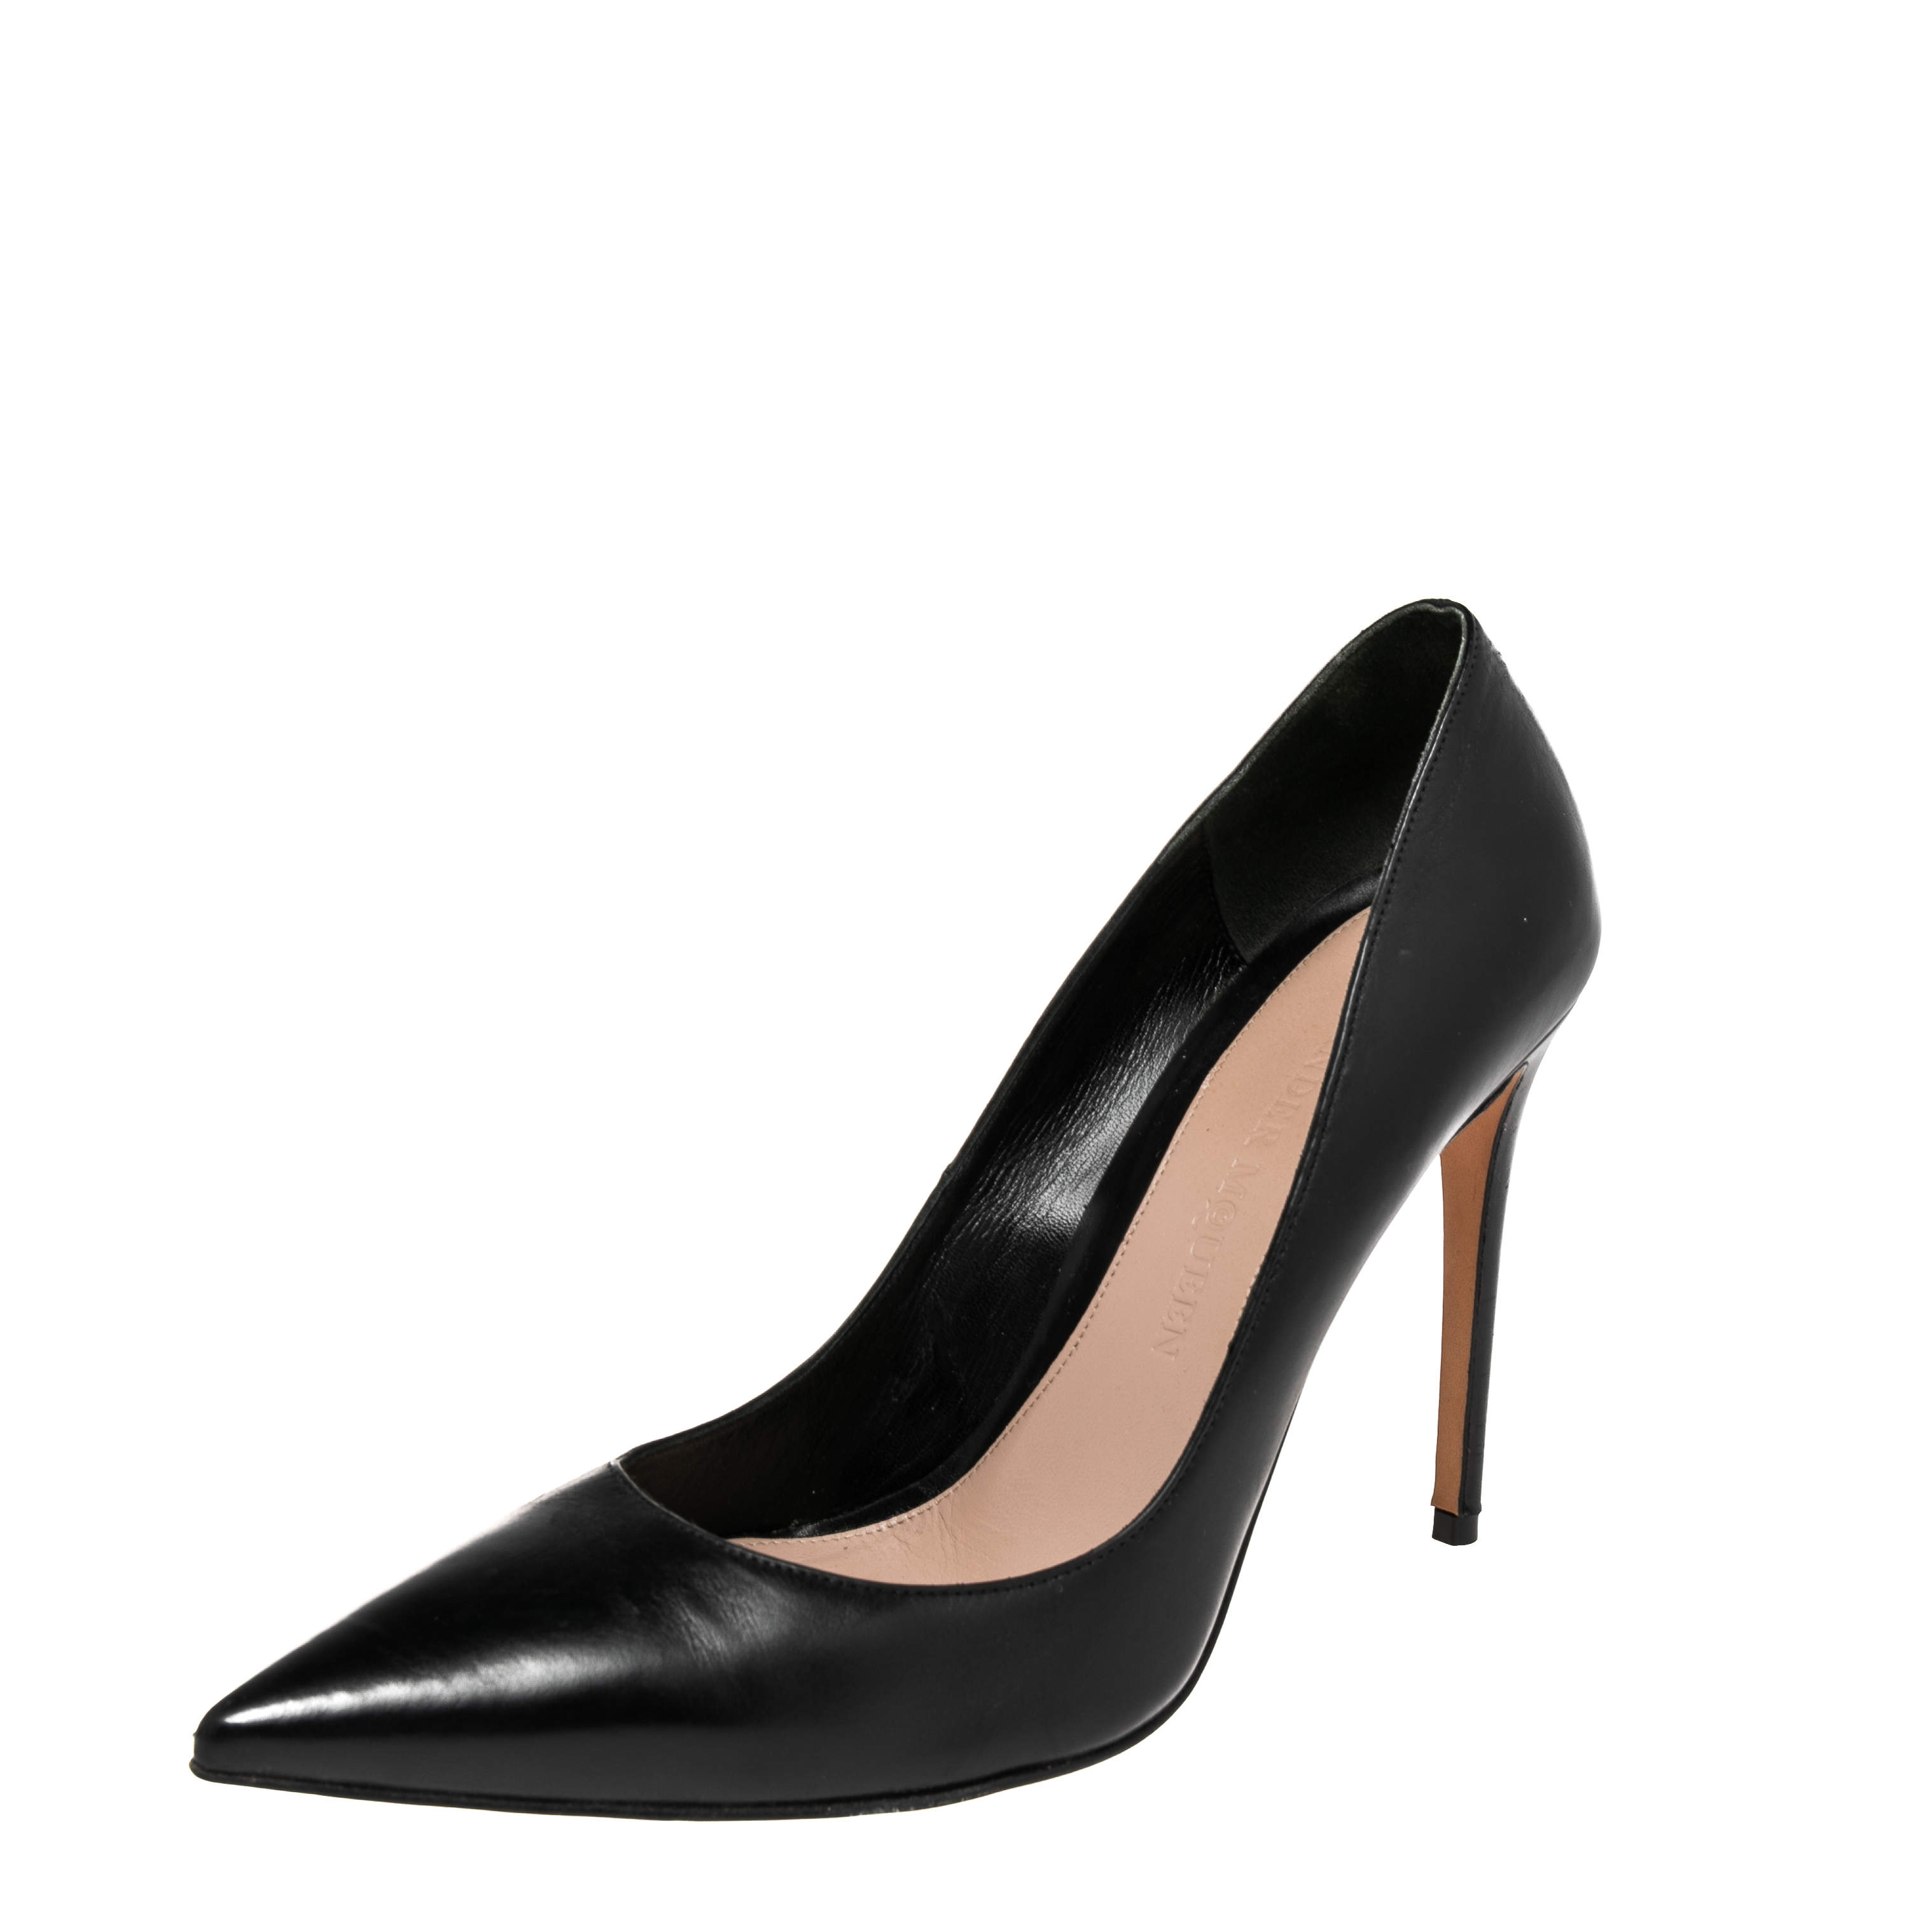 Alexander McQueen Black Leather Pointed Toe Pumps Size 39